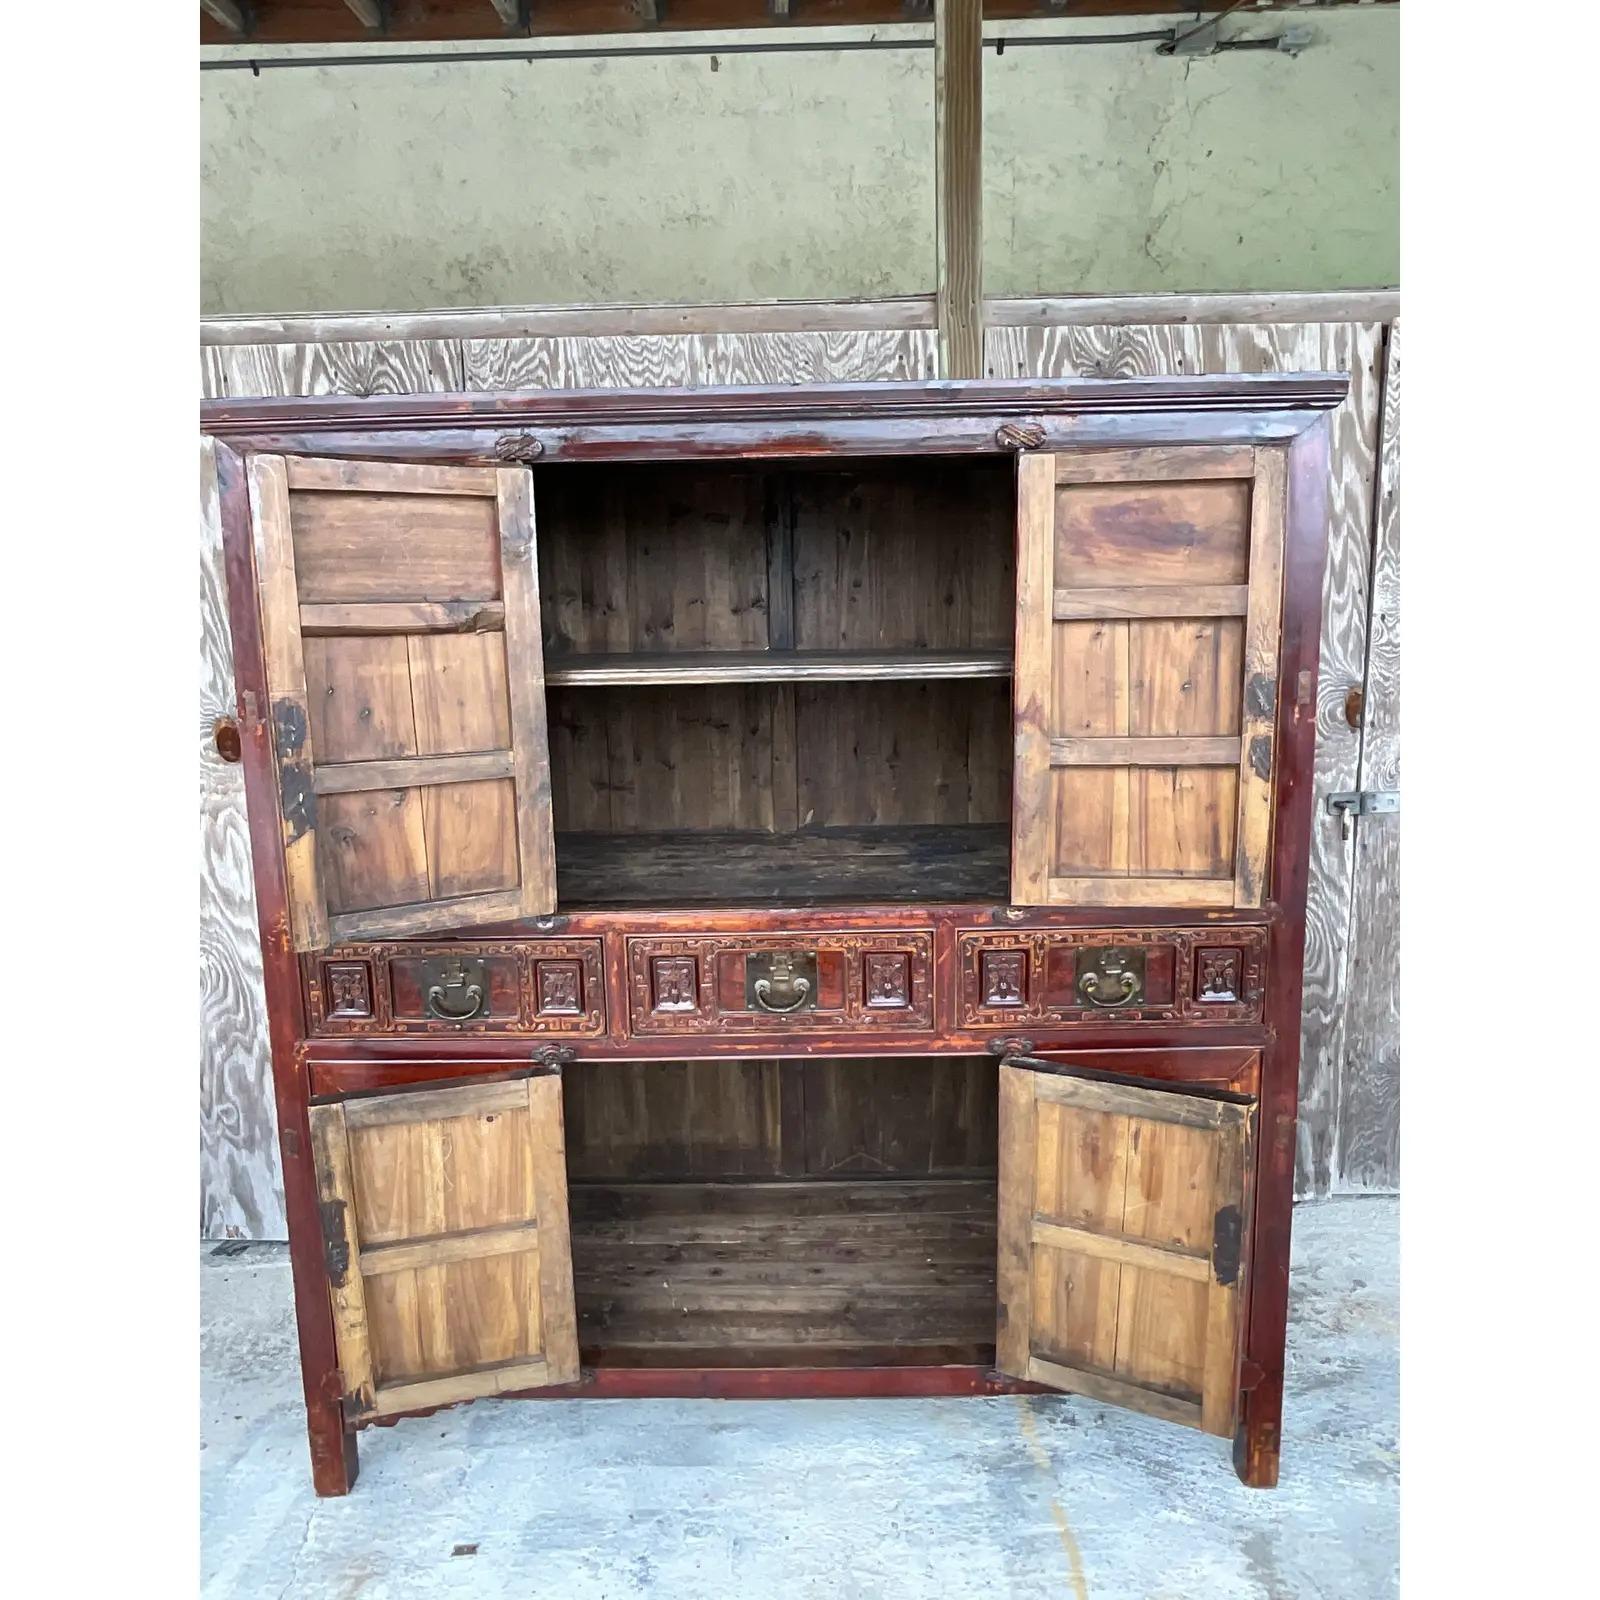 Stunning vintage Asian red lacquered cabinet. Glossy reclaimed wood carved with gorgeous little scenes. Gilt touches across the top. Lots of interior storage. A real showstopper that would make a fabulous dry bar. Acquired from a Palm Beach estate.